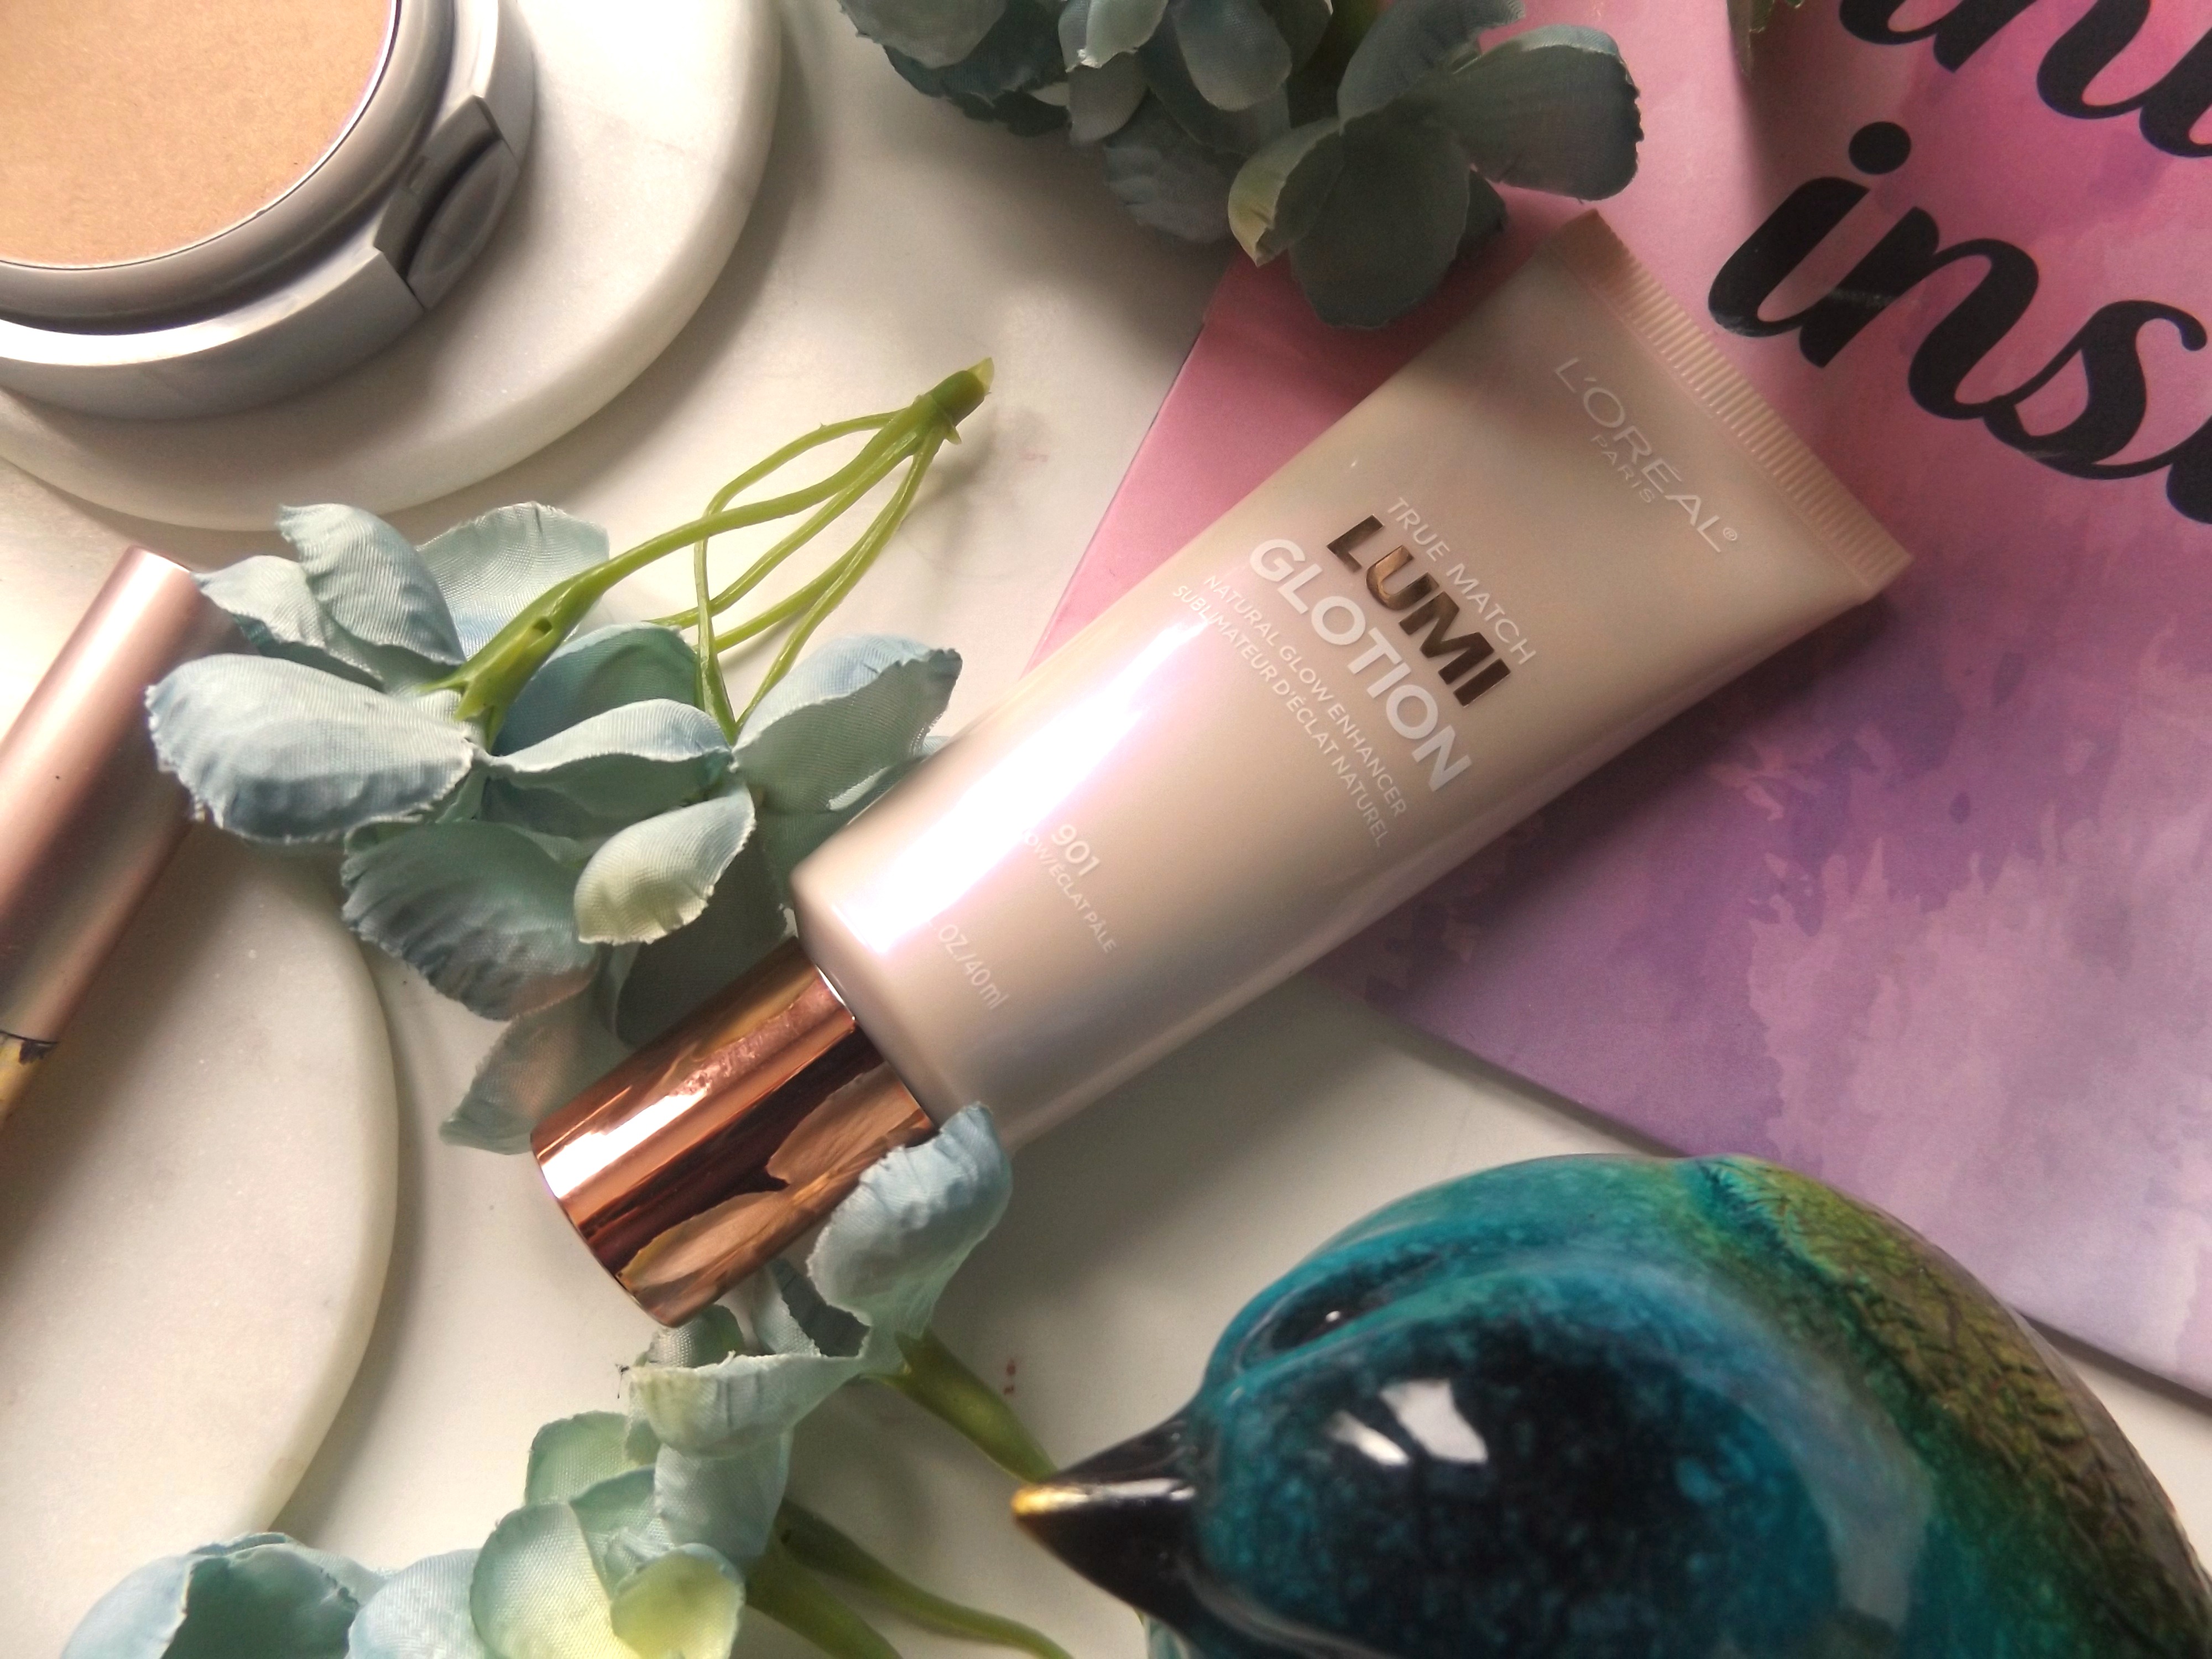 L'Oreal glow lotion in pink tube 